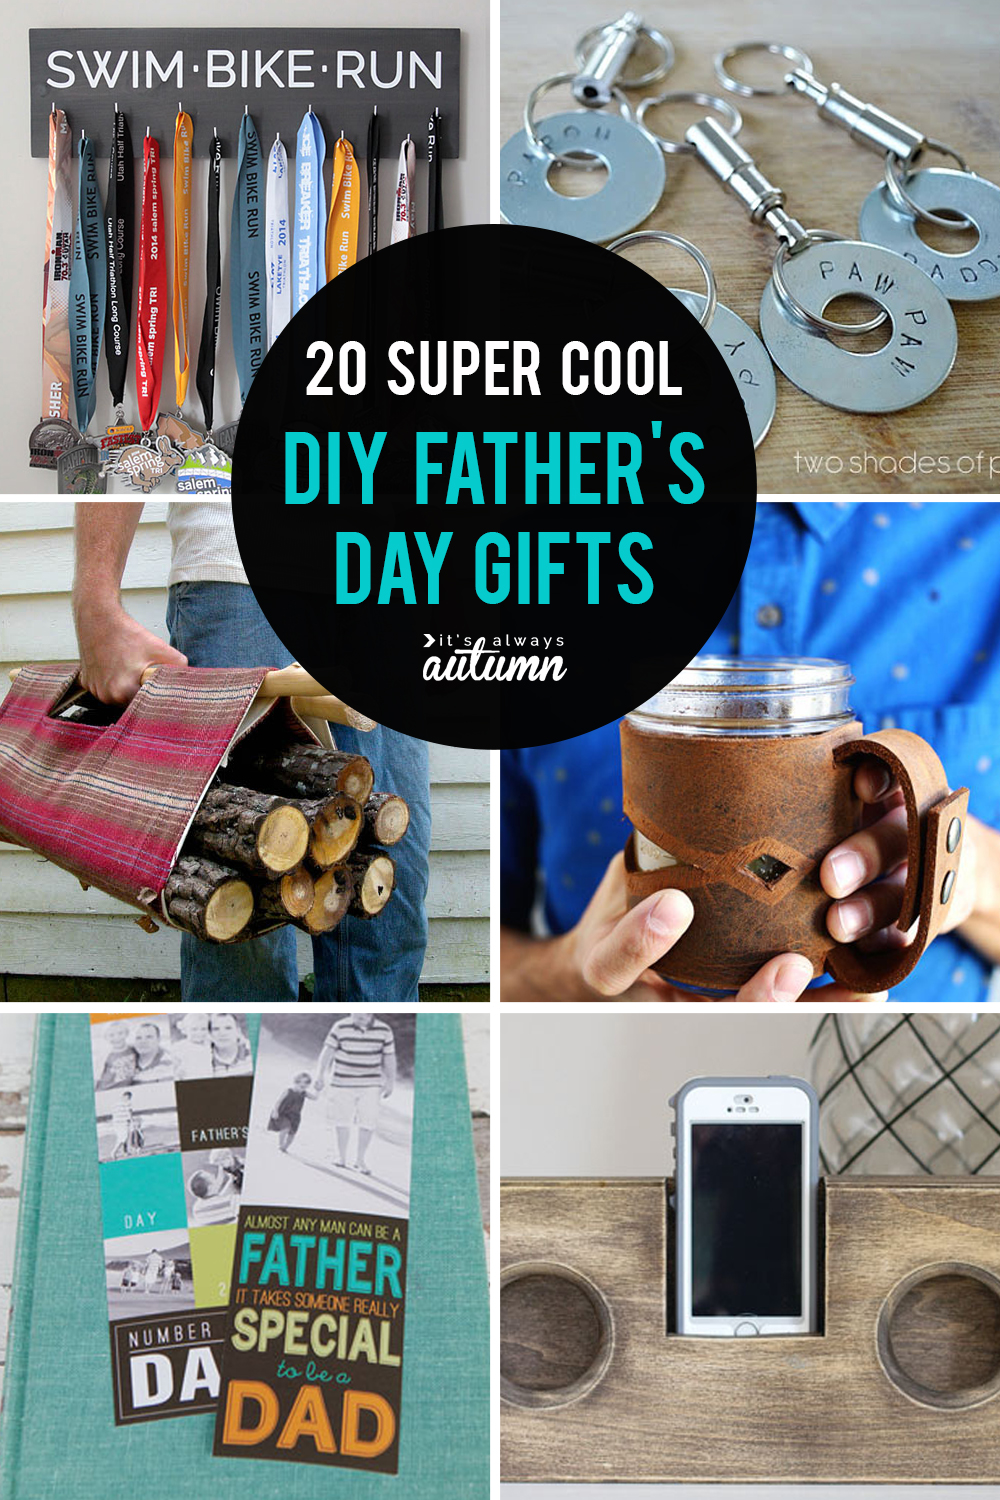 Quick Gifts: Knitted Gift Ideas for Father's Day